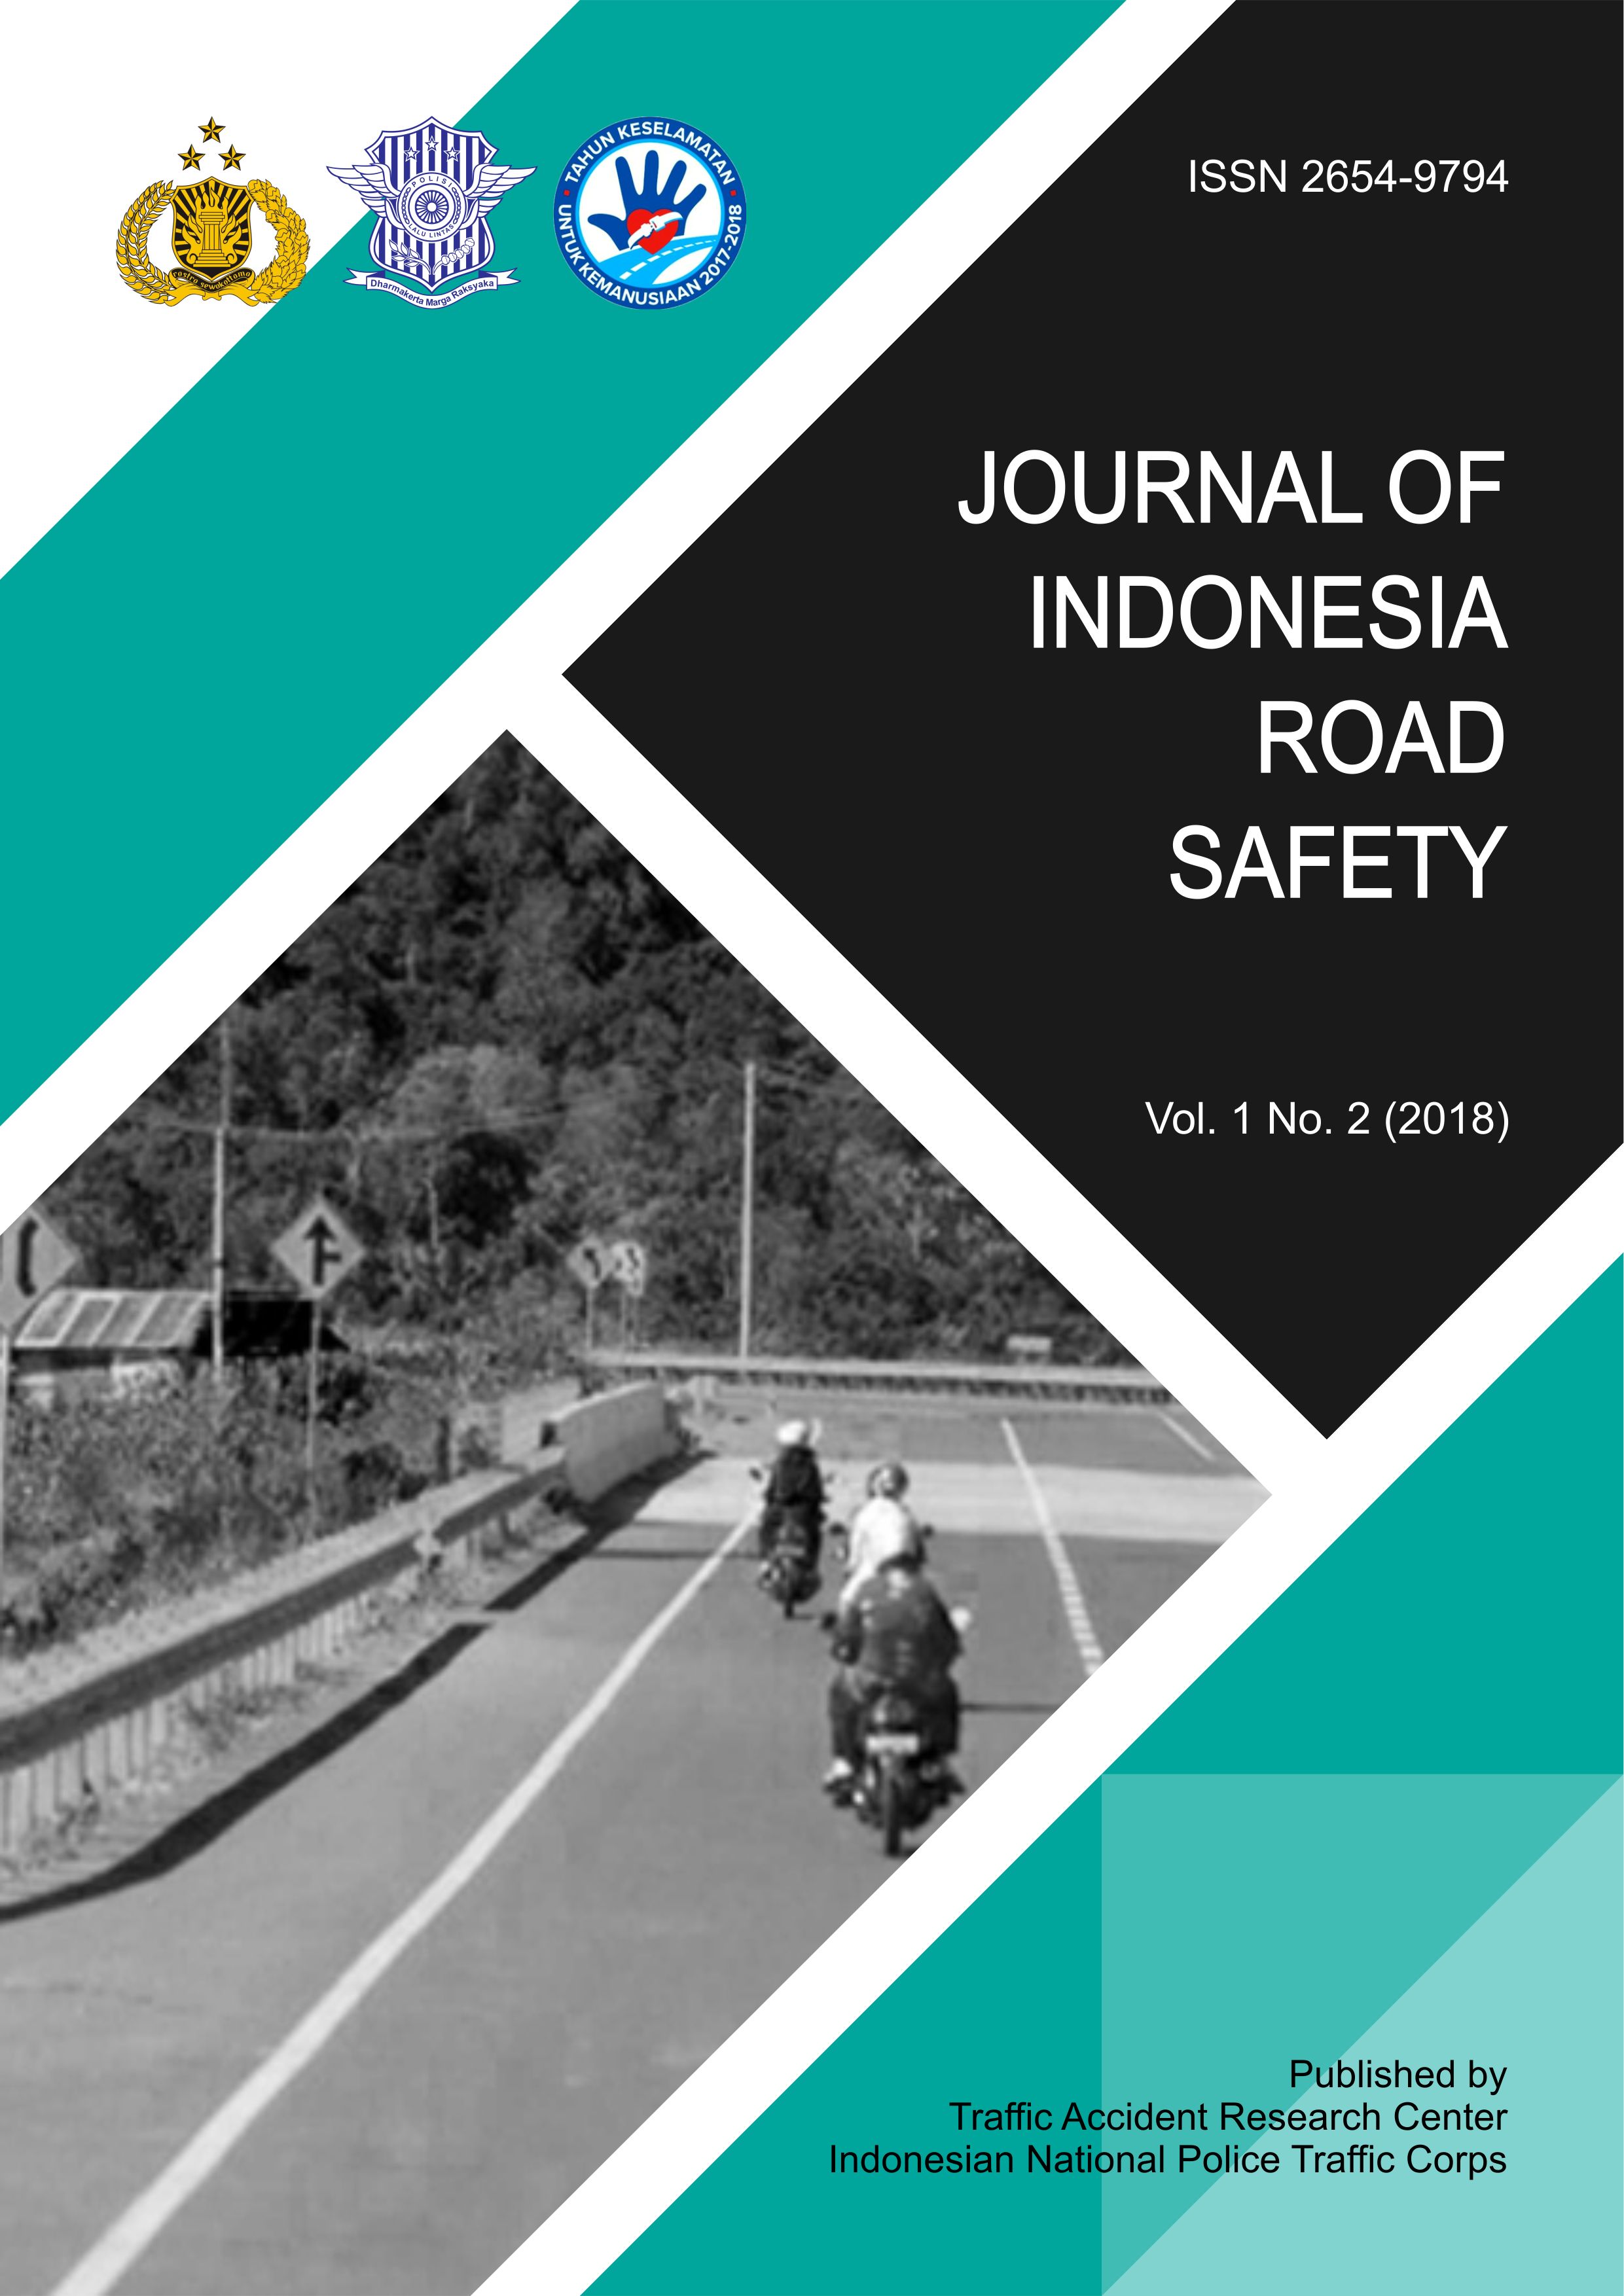 Published by Traffic Accident Research Center (TARC), Indonesian National Traffic Corps